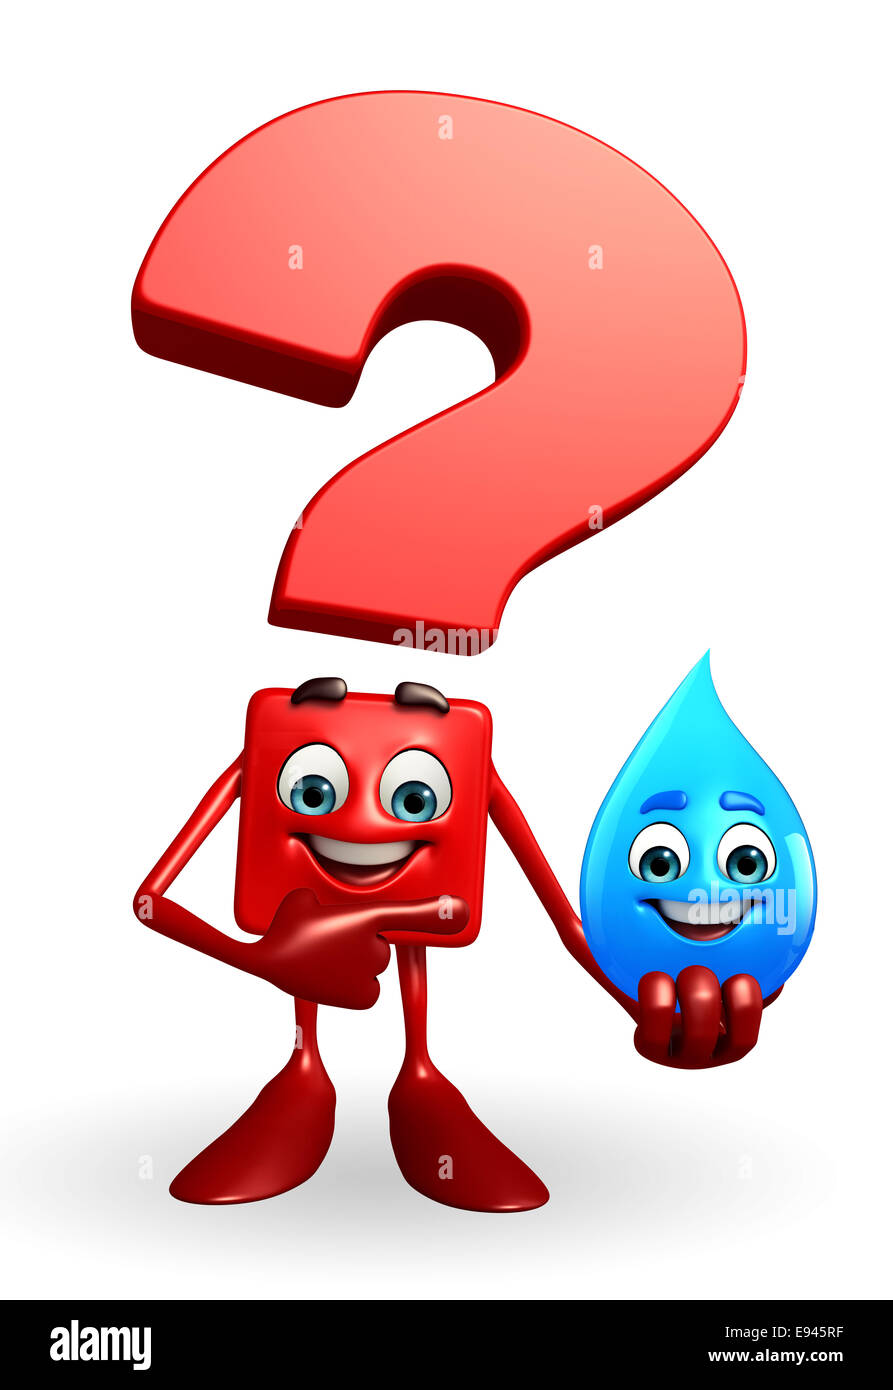 Cartoon Character Of Question Mark With Water Drope Stock Photo Alamy